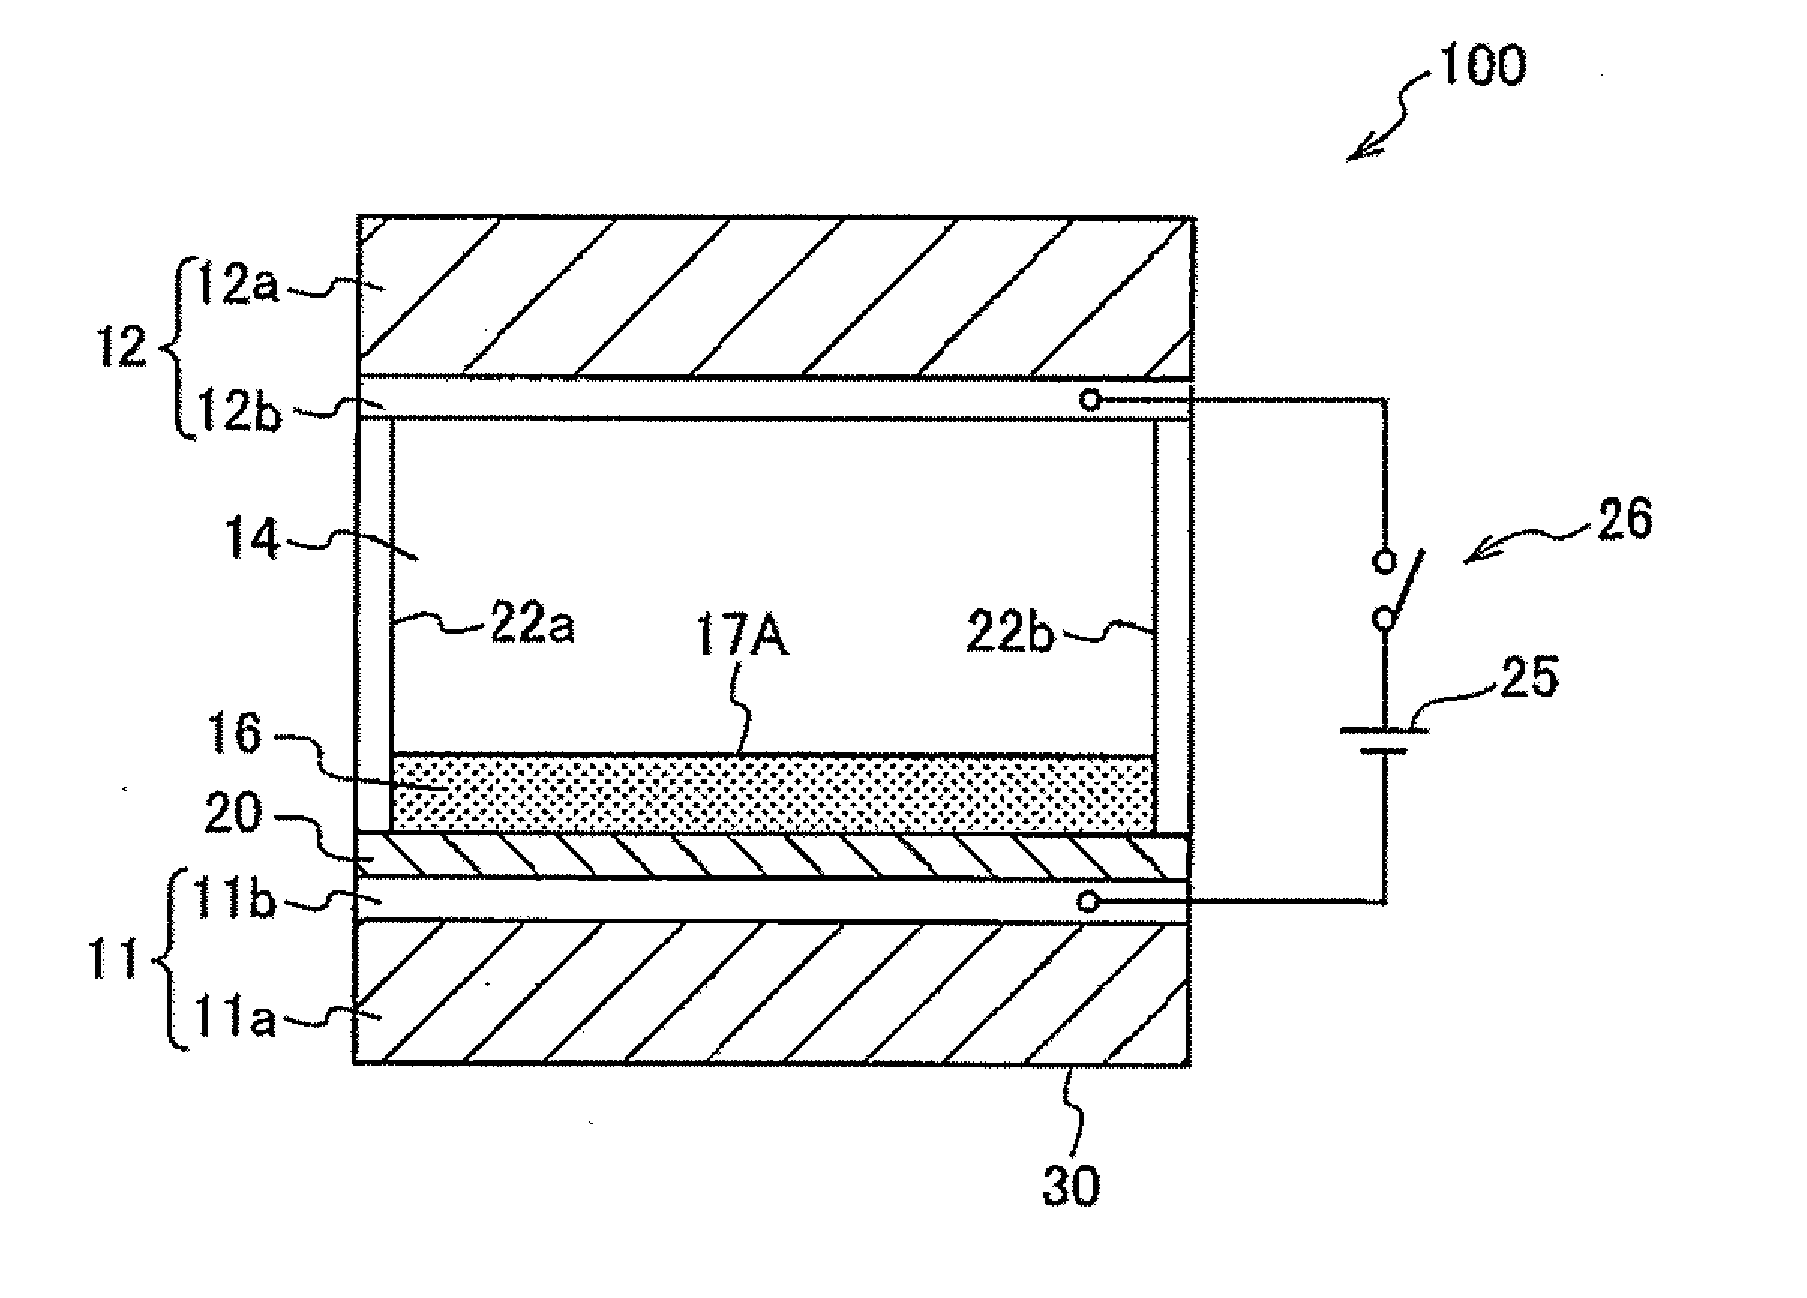 Colored composition and image display structure